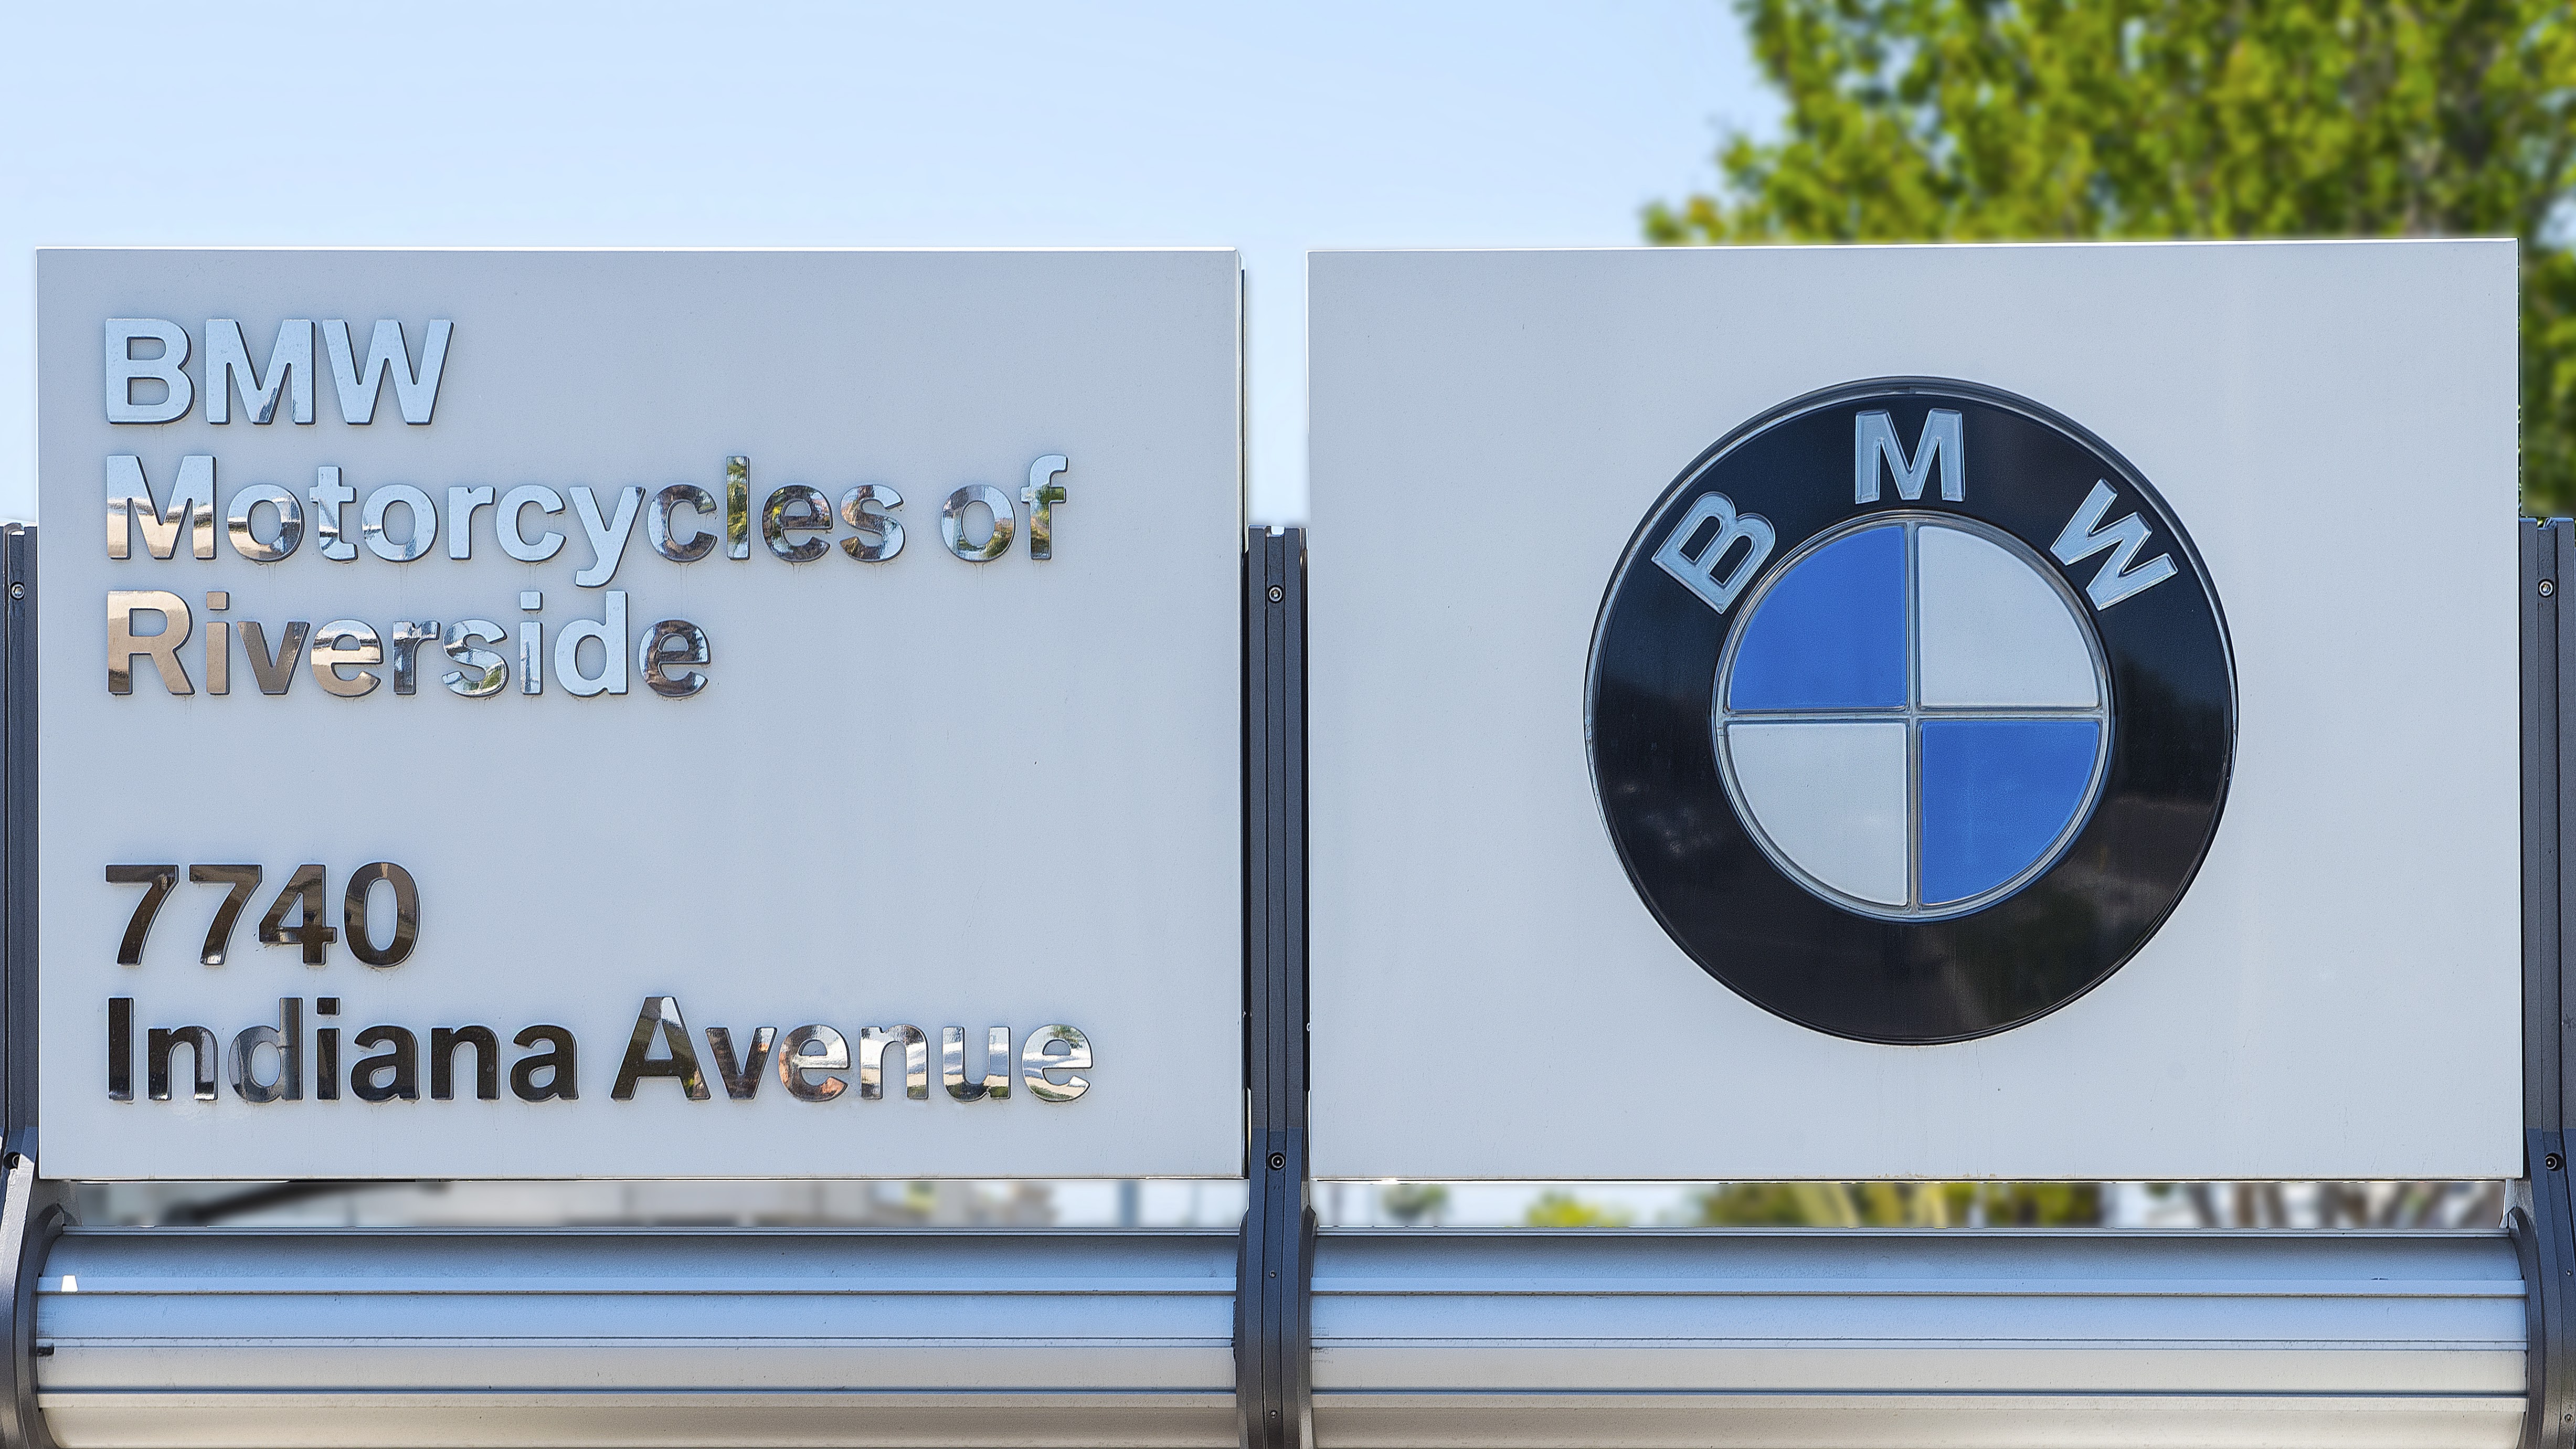 Photos | Southern California BMW Motorcycle Dealers